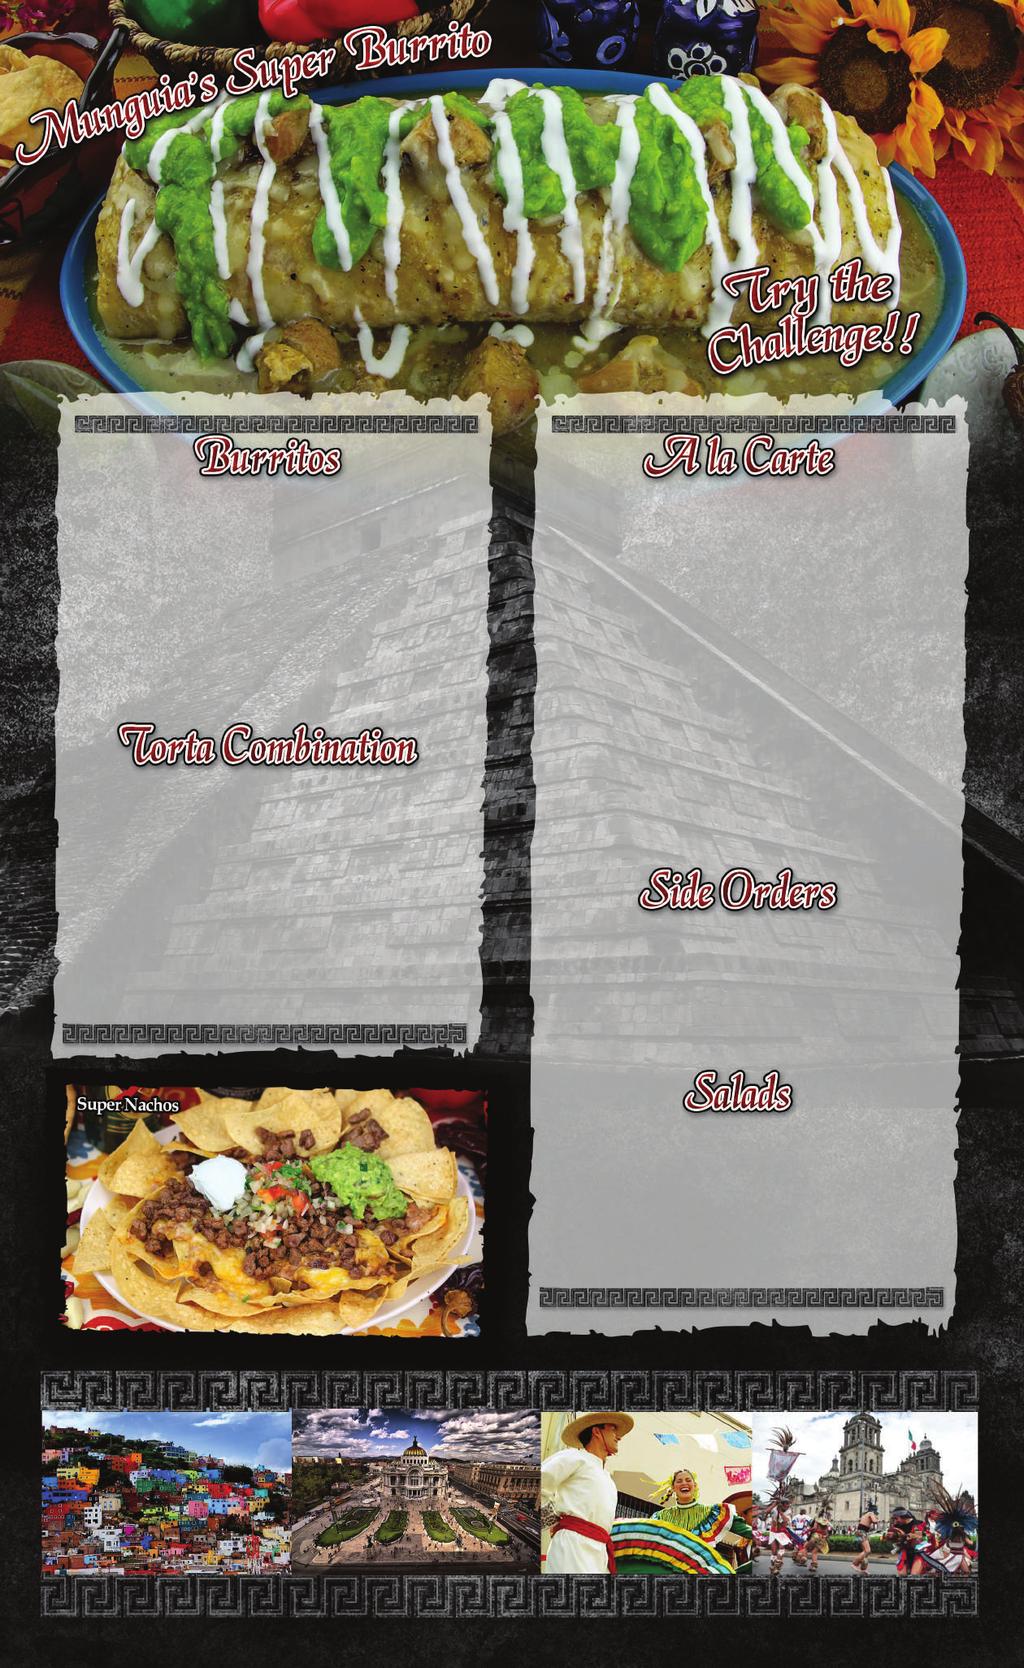 All Burritos are served with beans & rice inside Munguia s Super Burrito 15.39 Complete the challenge and make it on to our wall of fame!! Wet (Baked) Burrito 8.